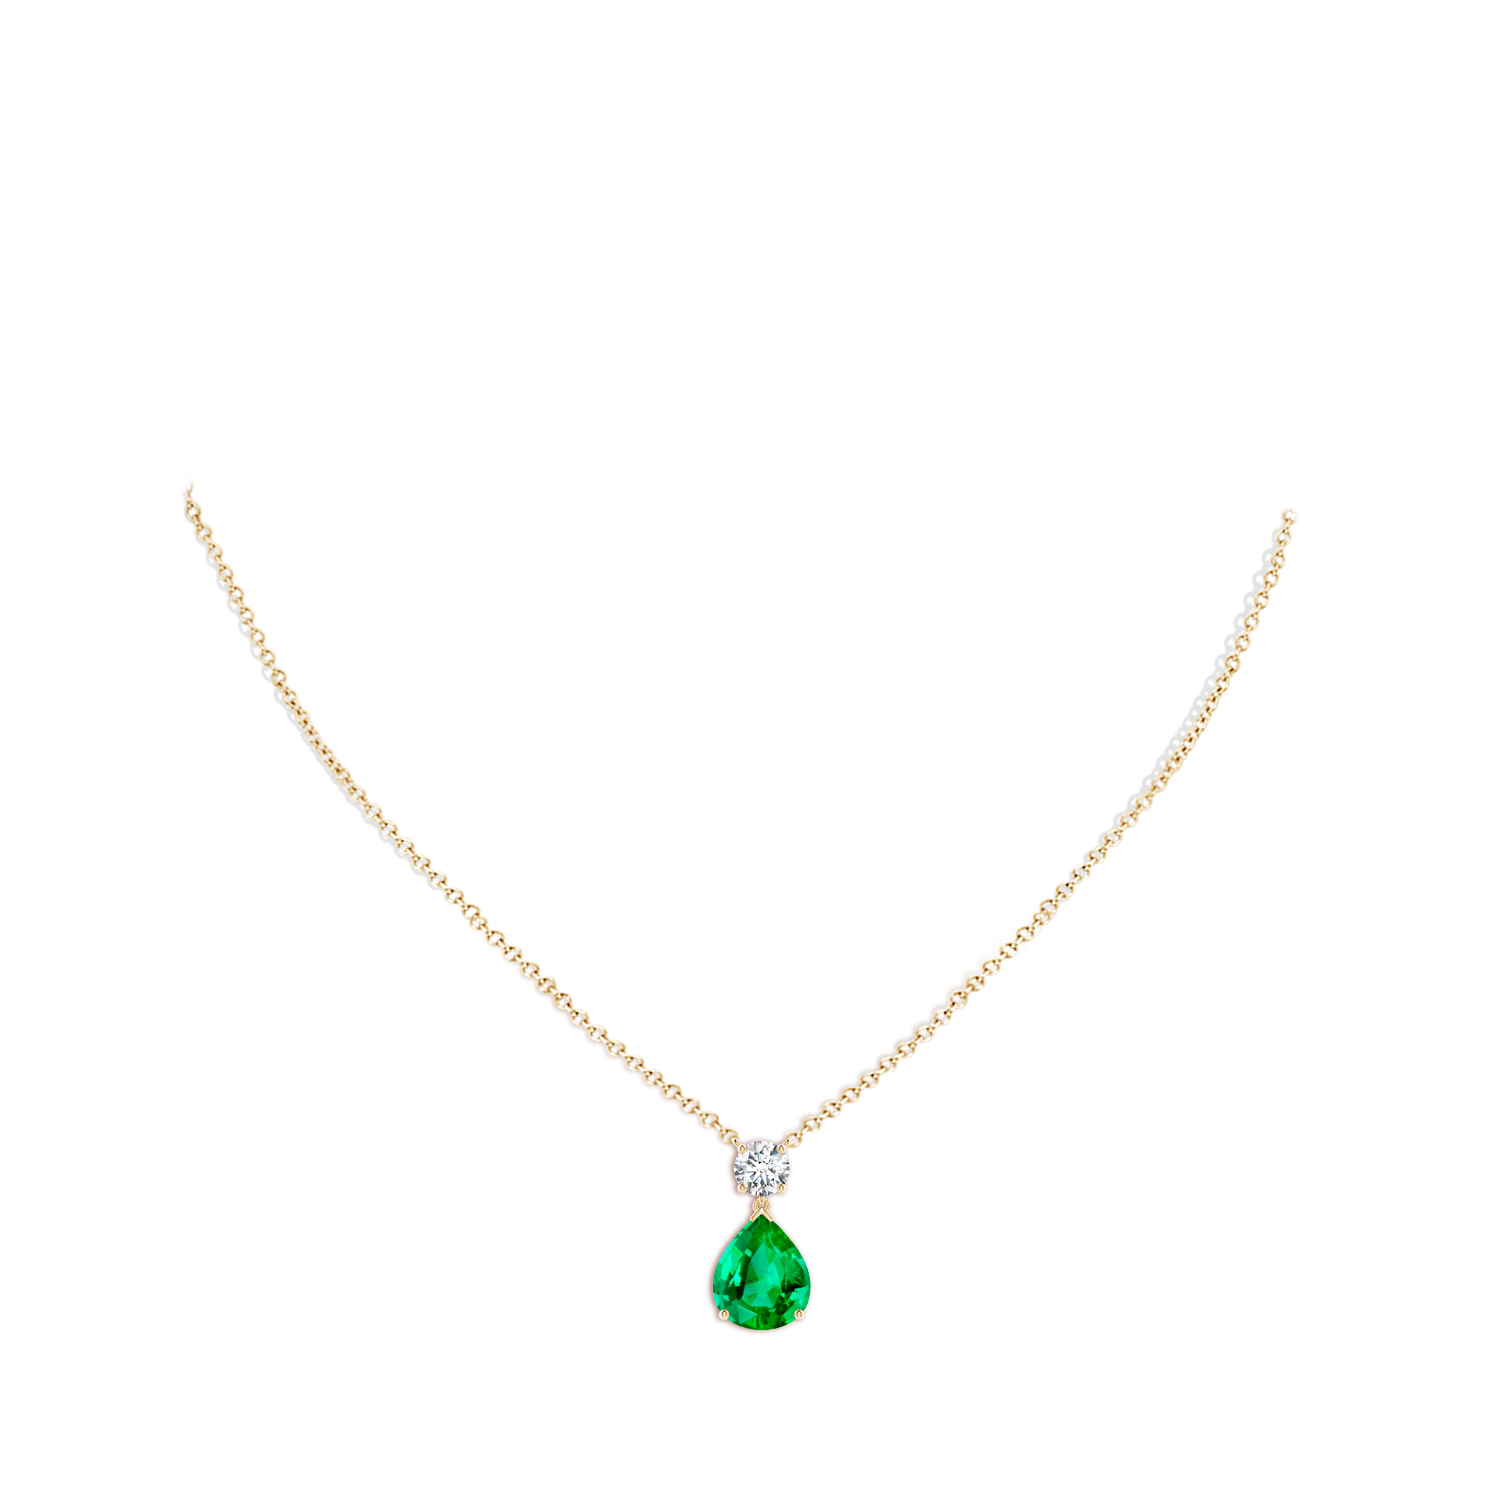 AAA - Emerald / 5.21 CT / 14 KT Yellow Gold